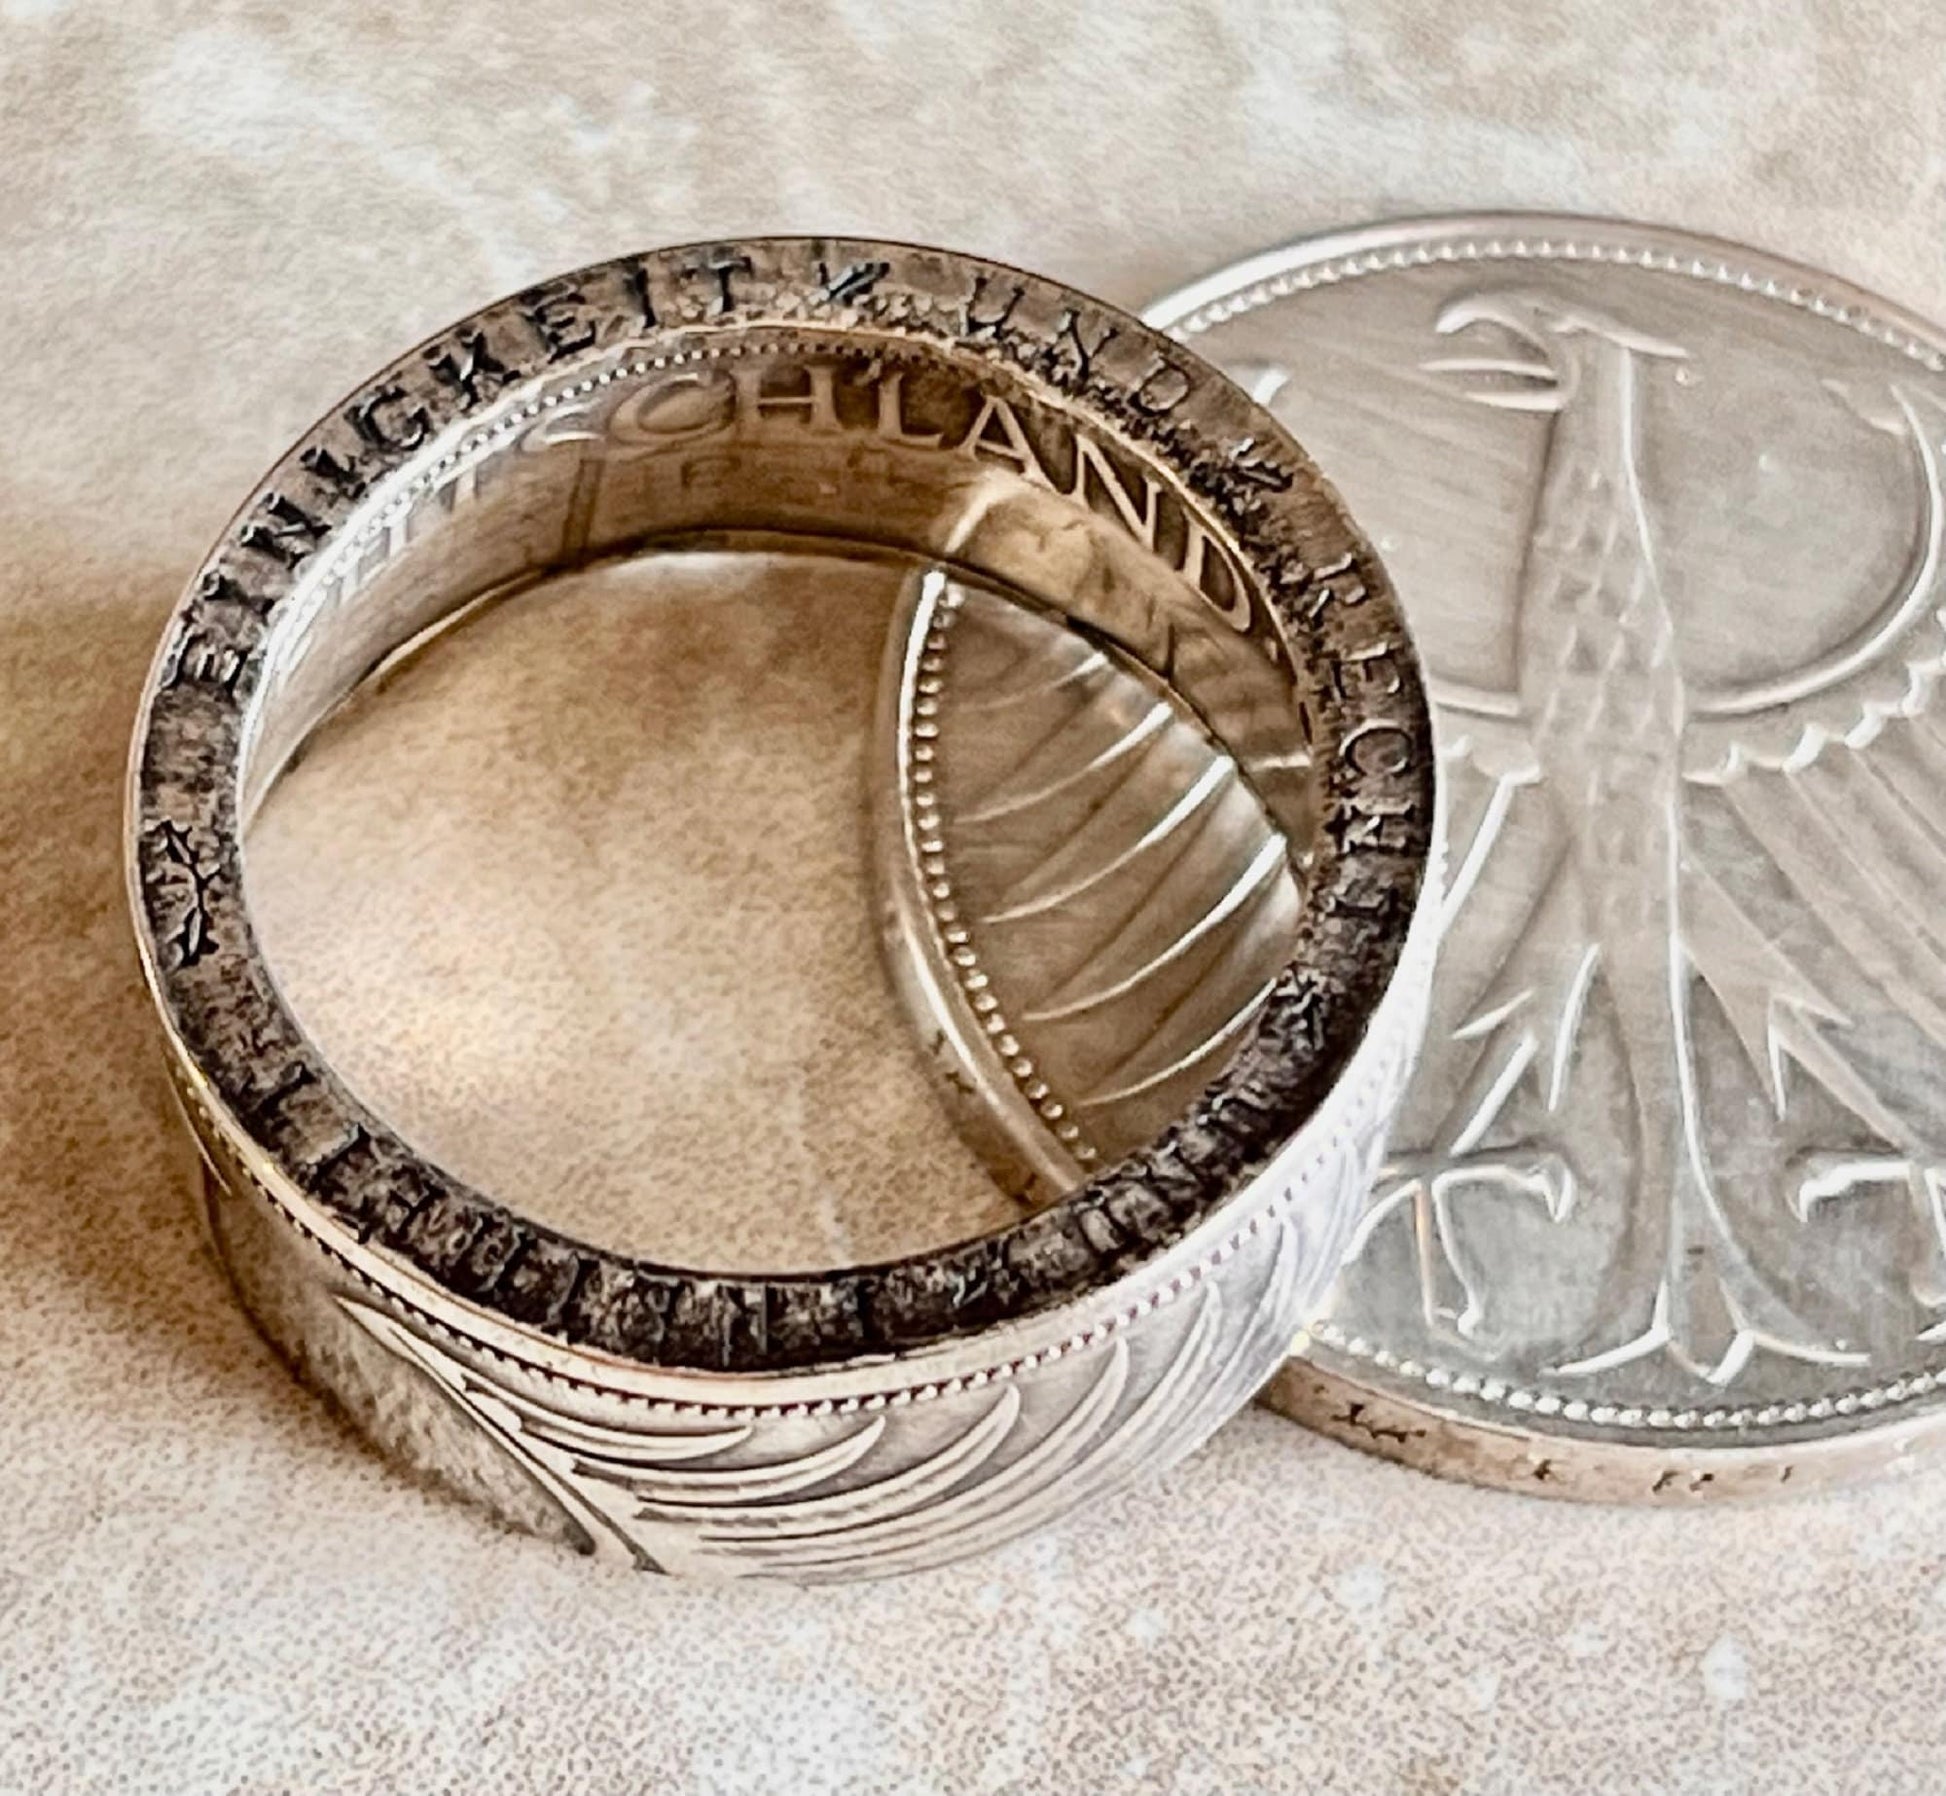 Germany Coin Ring Silver Eagle 5 German Mark Handmade Personal Custom Ring Gift For Friend Coin Ring Gift For Him Her World Coin Collector